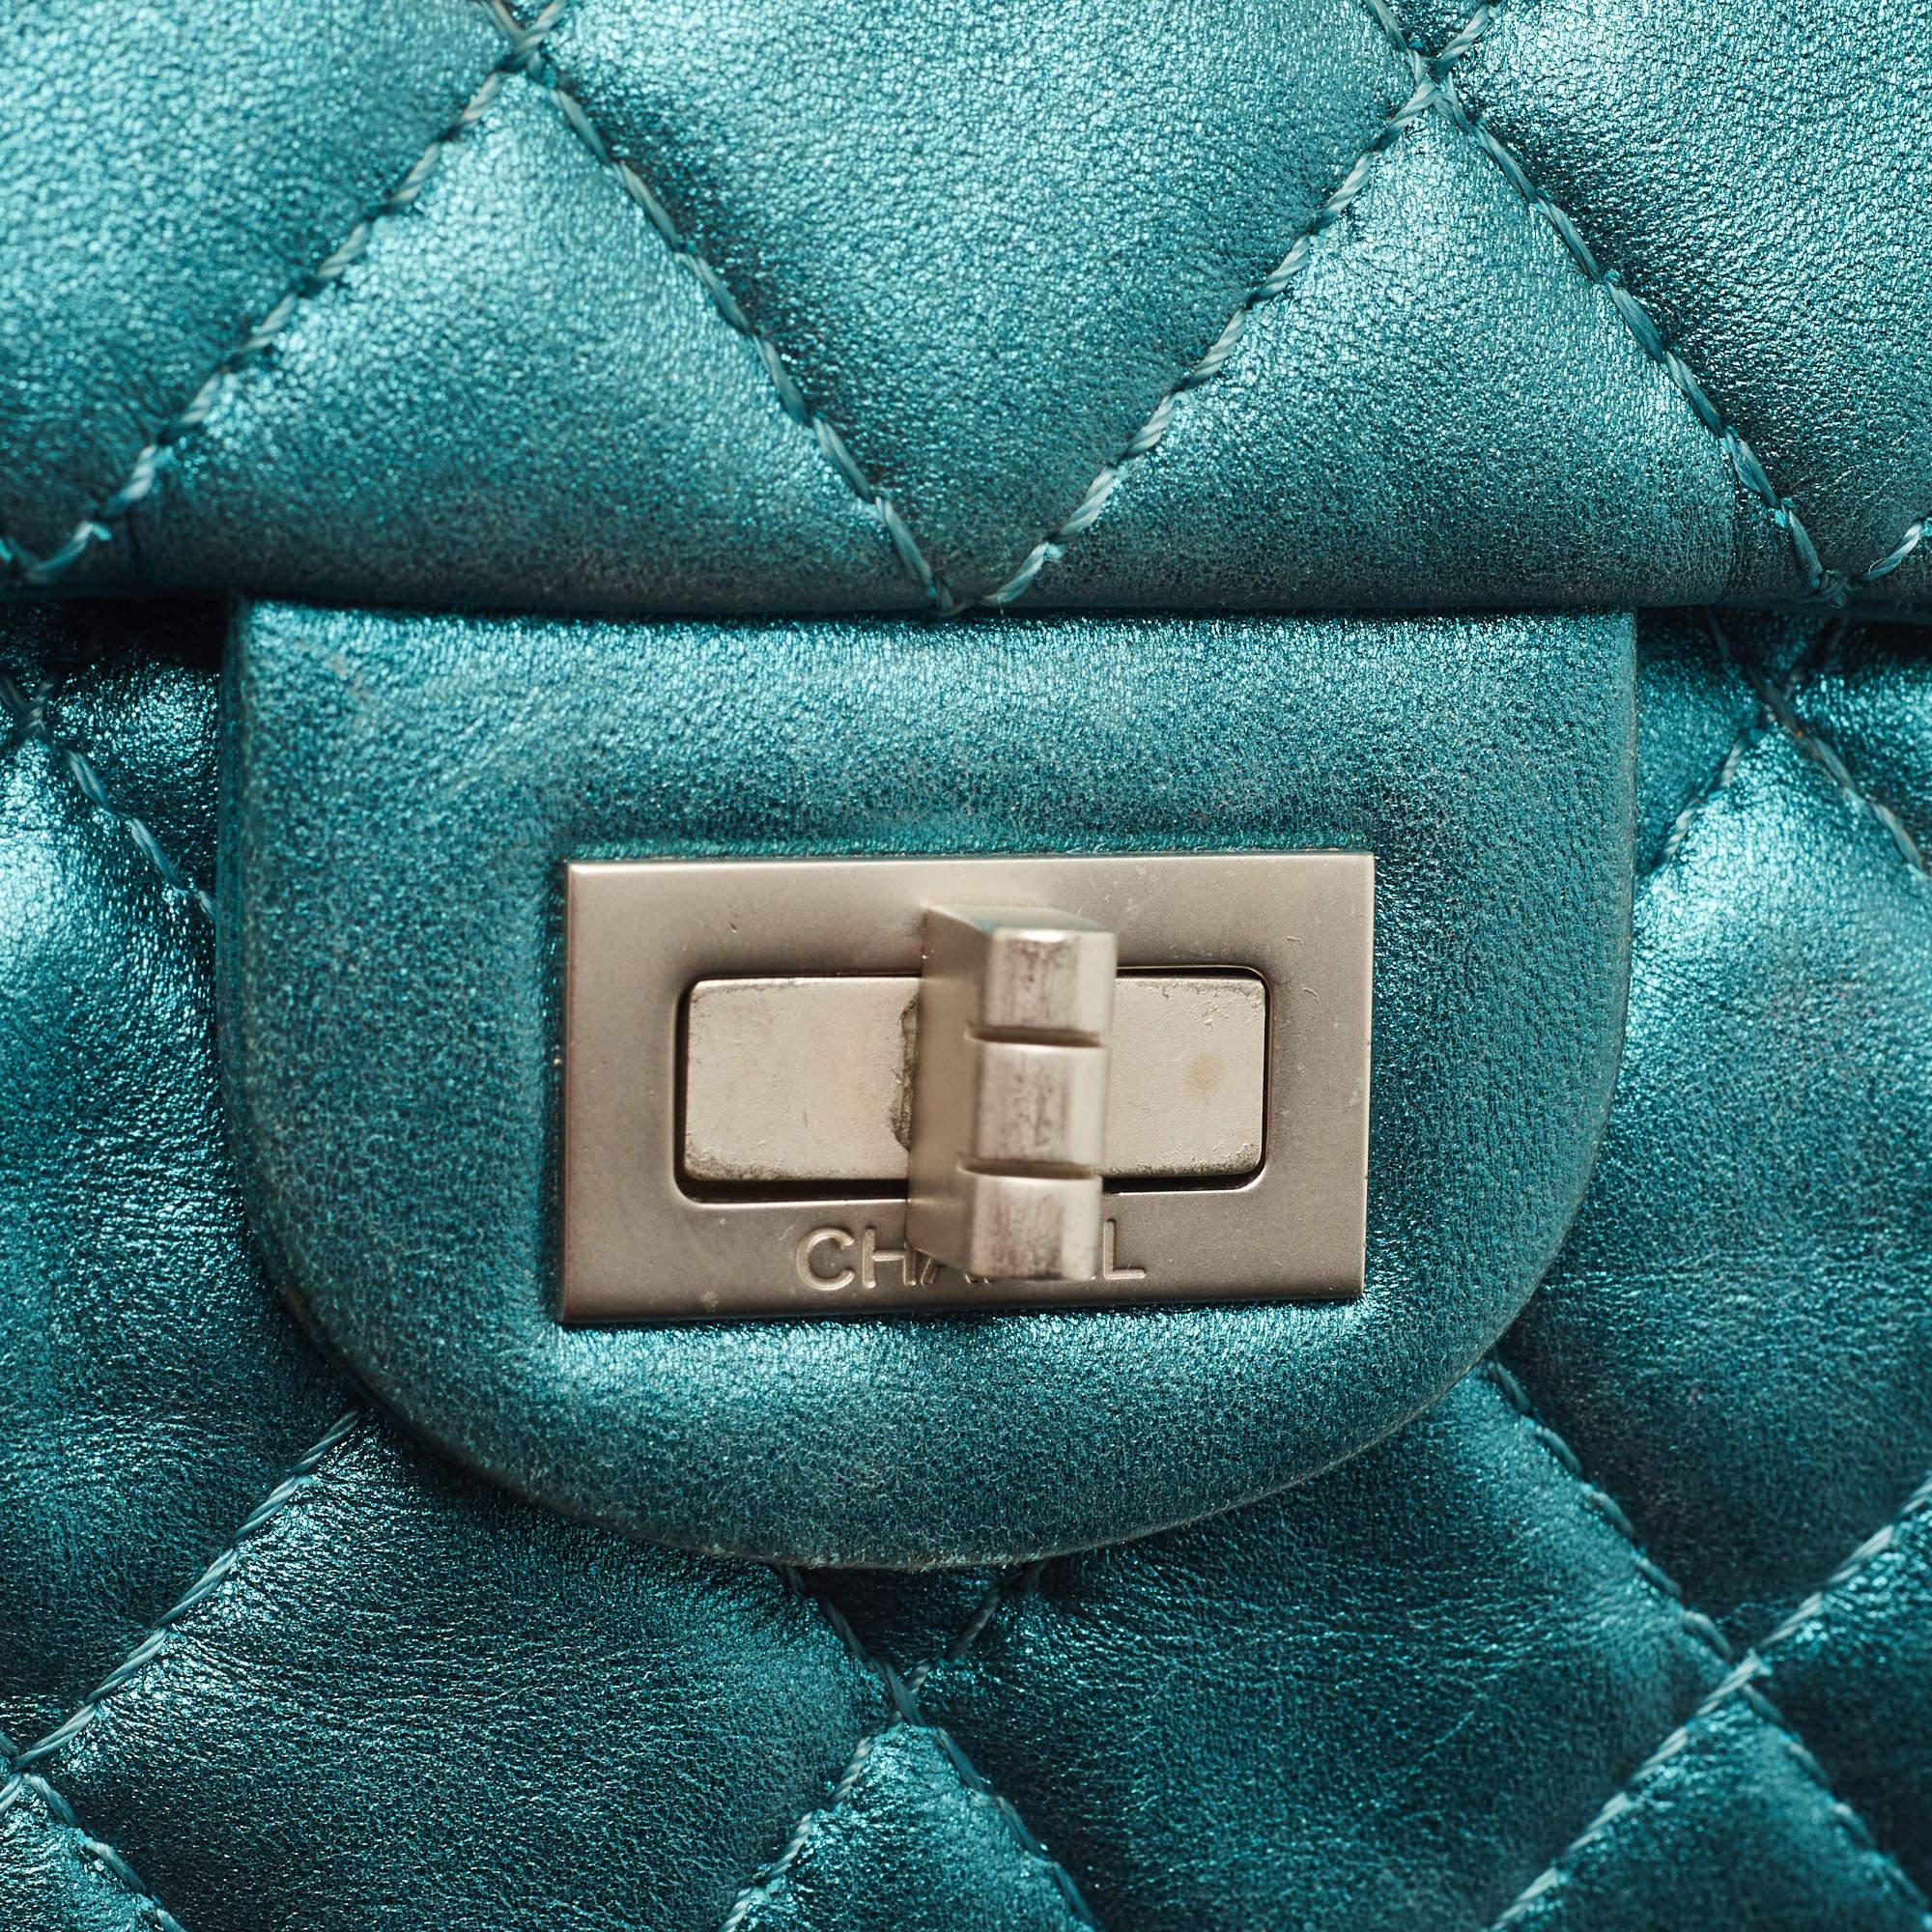 Chanel Metallic Teal Green Quilted Leather Reissue 2.55 Classic 226 Flap Bag en vente 2